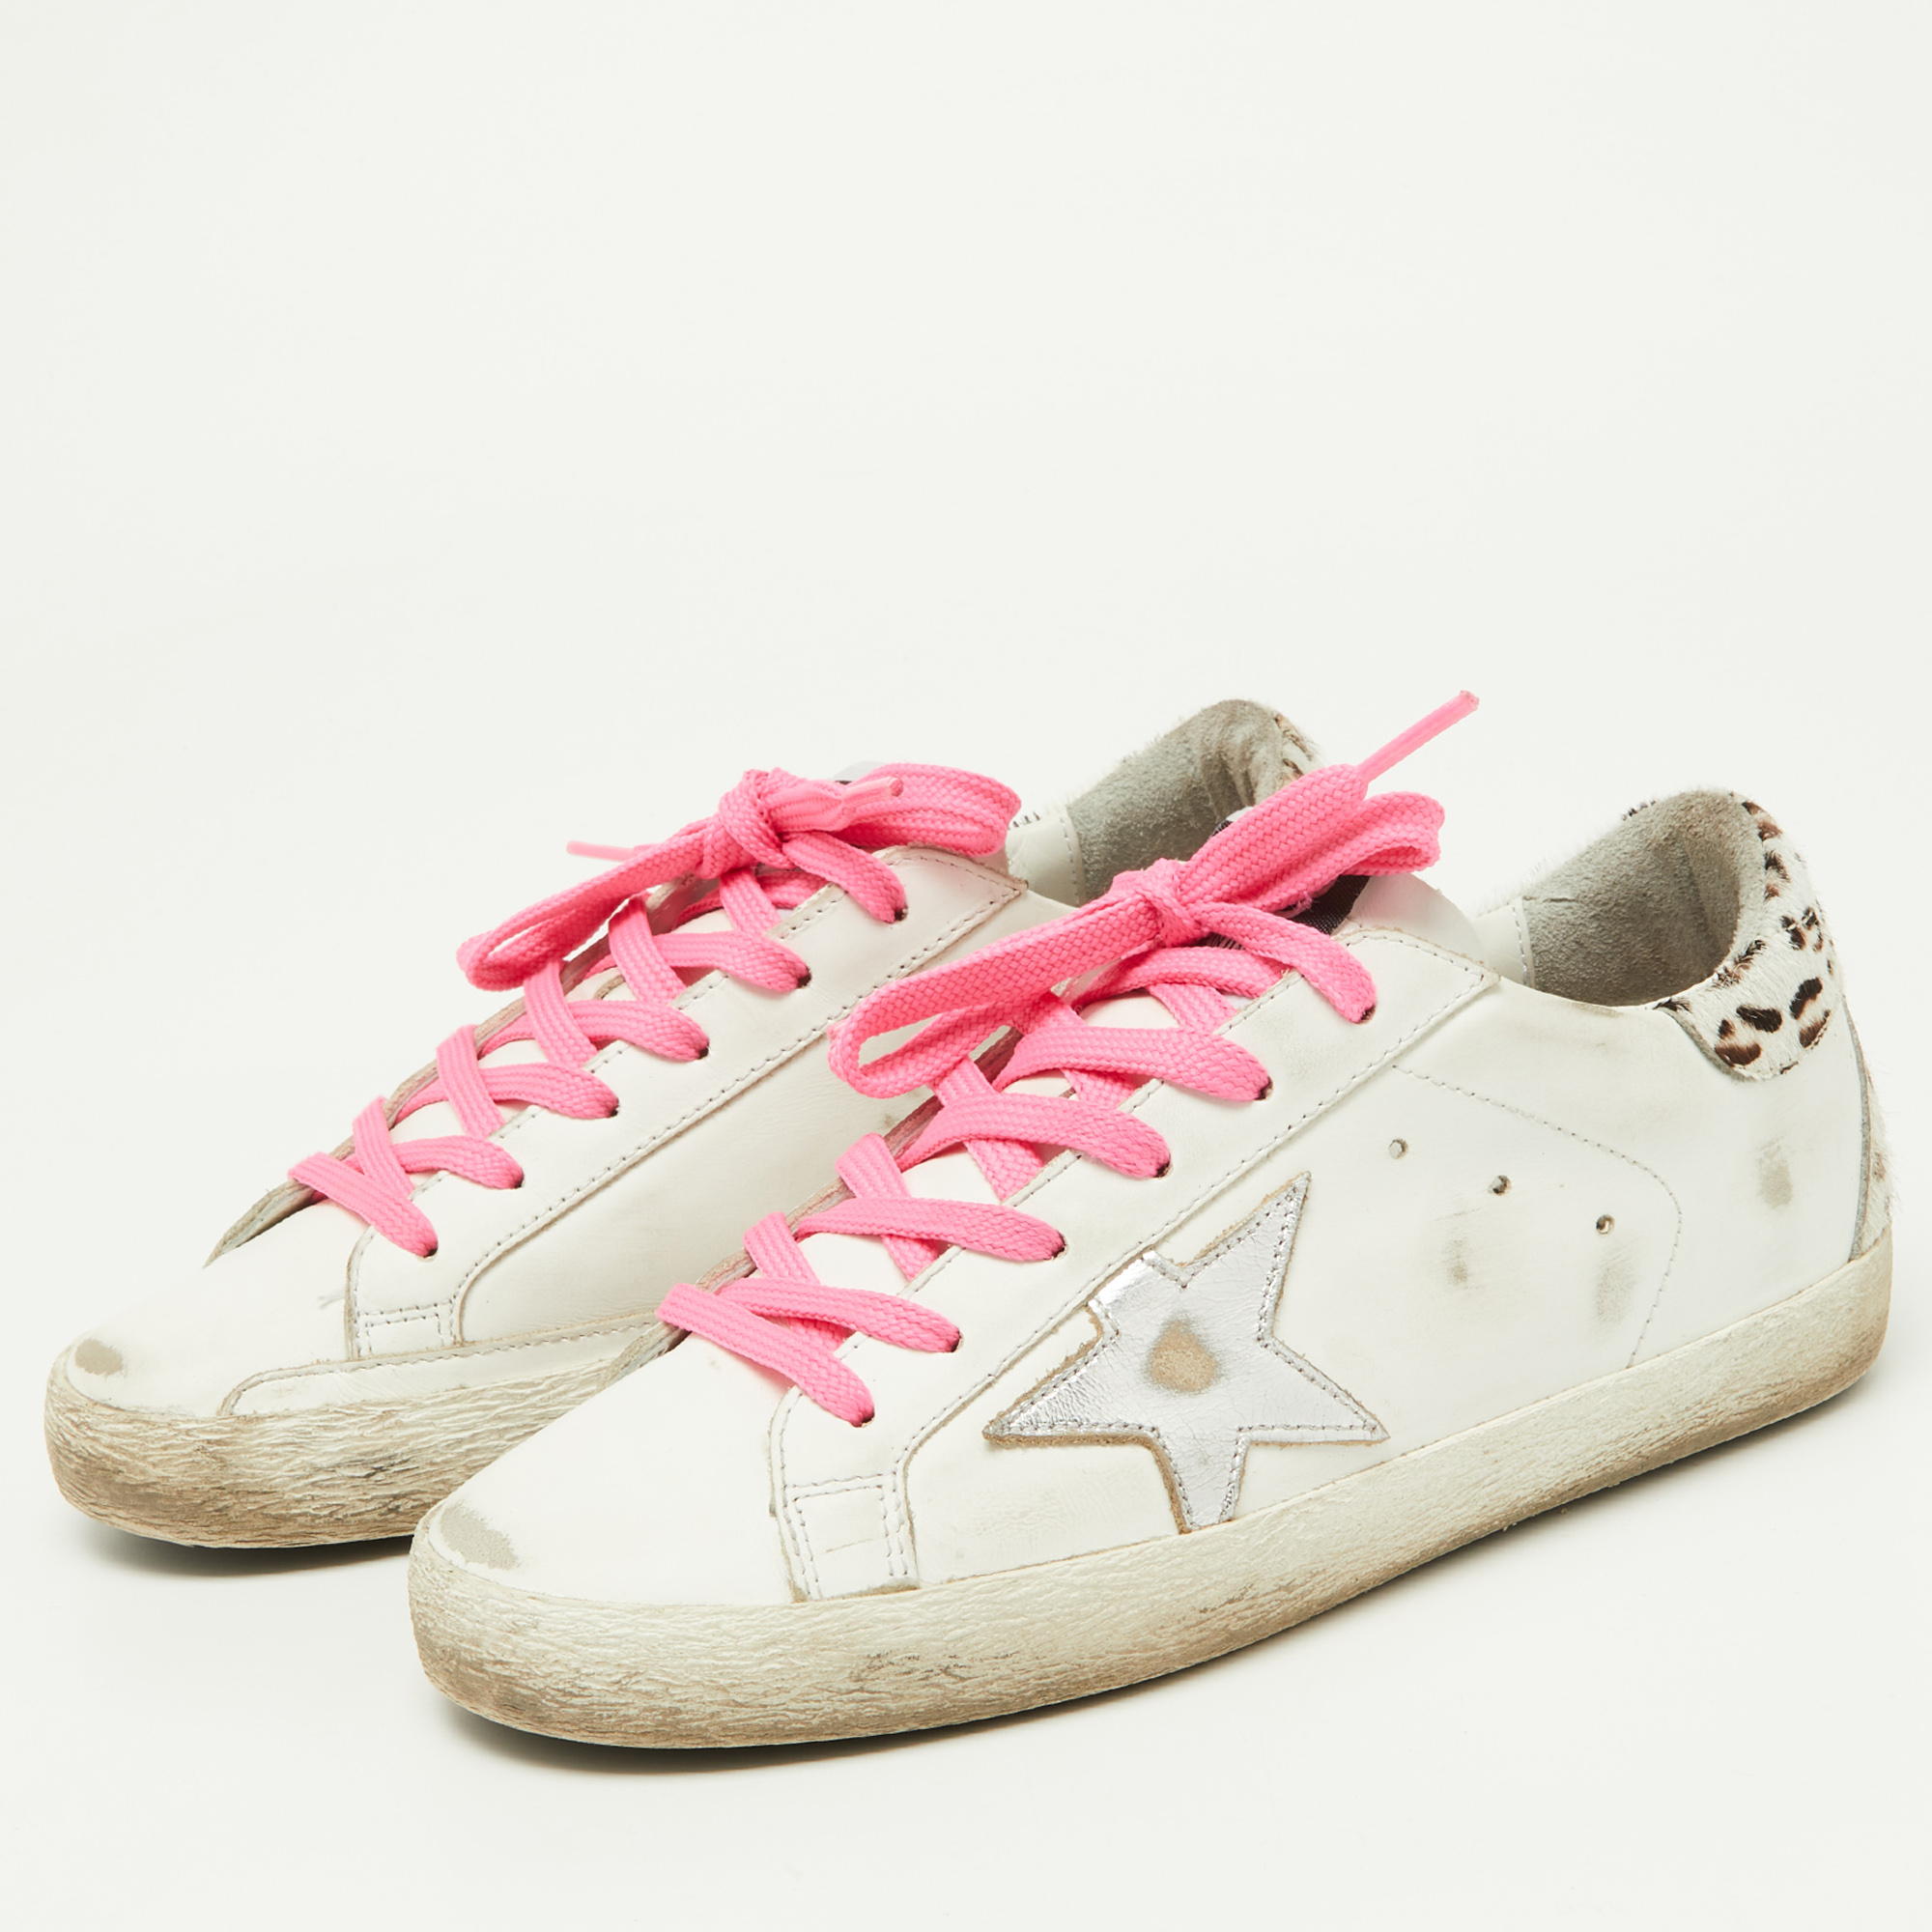 

Golden Goose White/Brown Leather and Calf Hair Superstar Sneakers Size